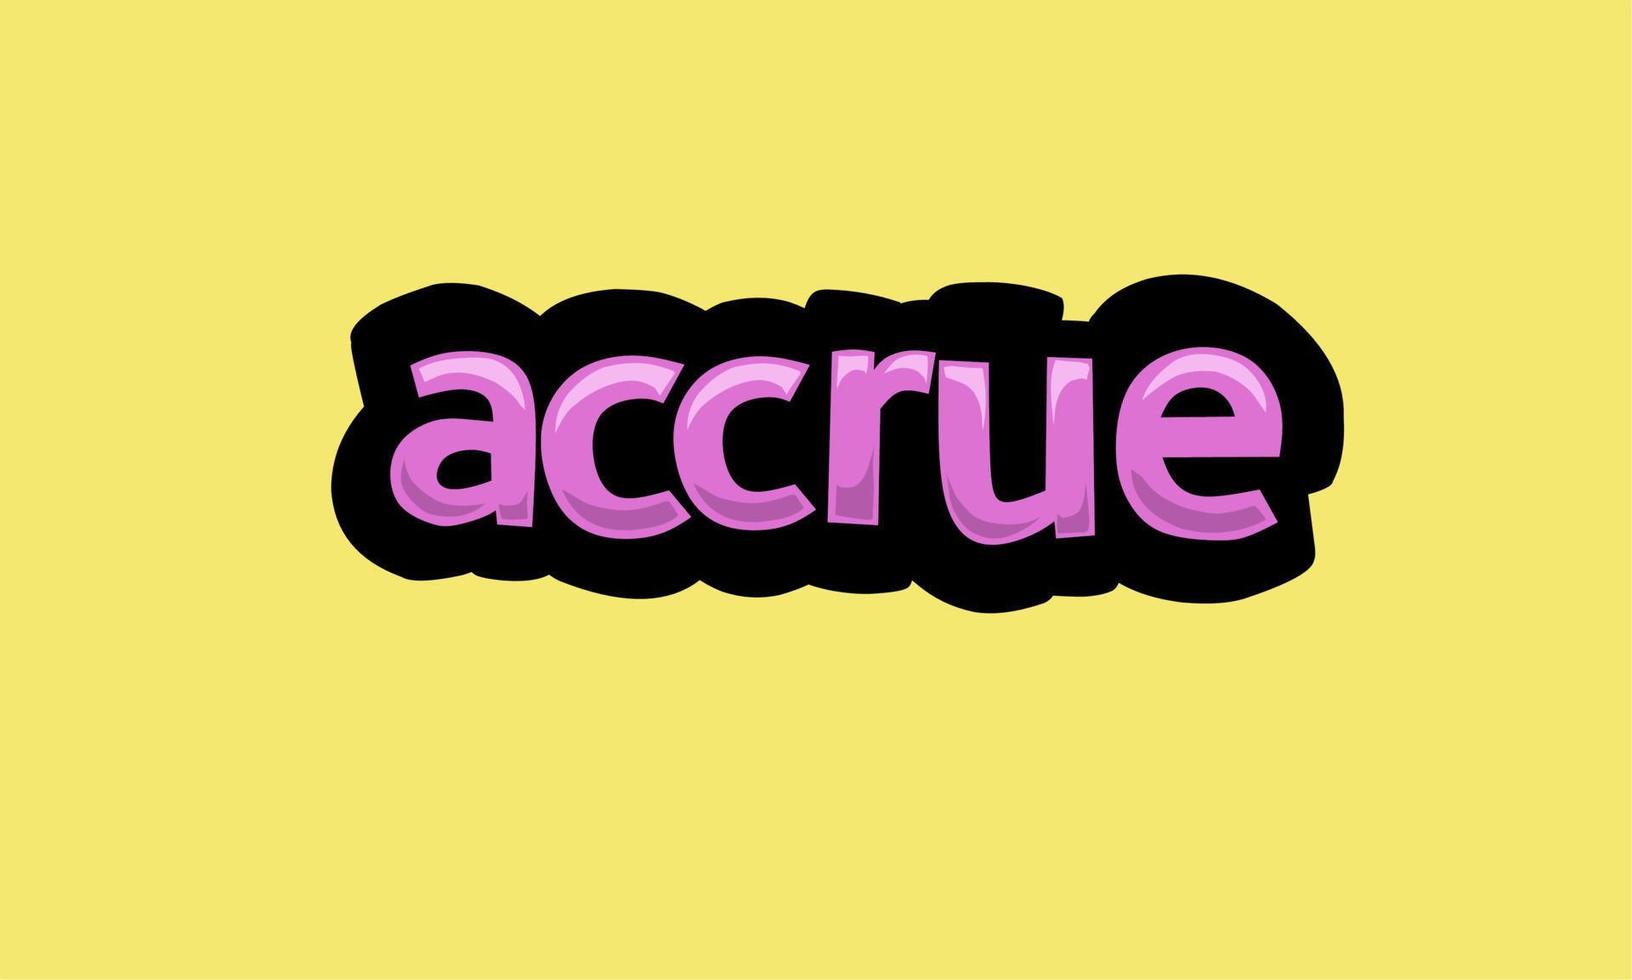 ACCRUE writing vector design on a yellow background